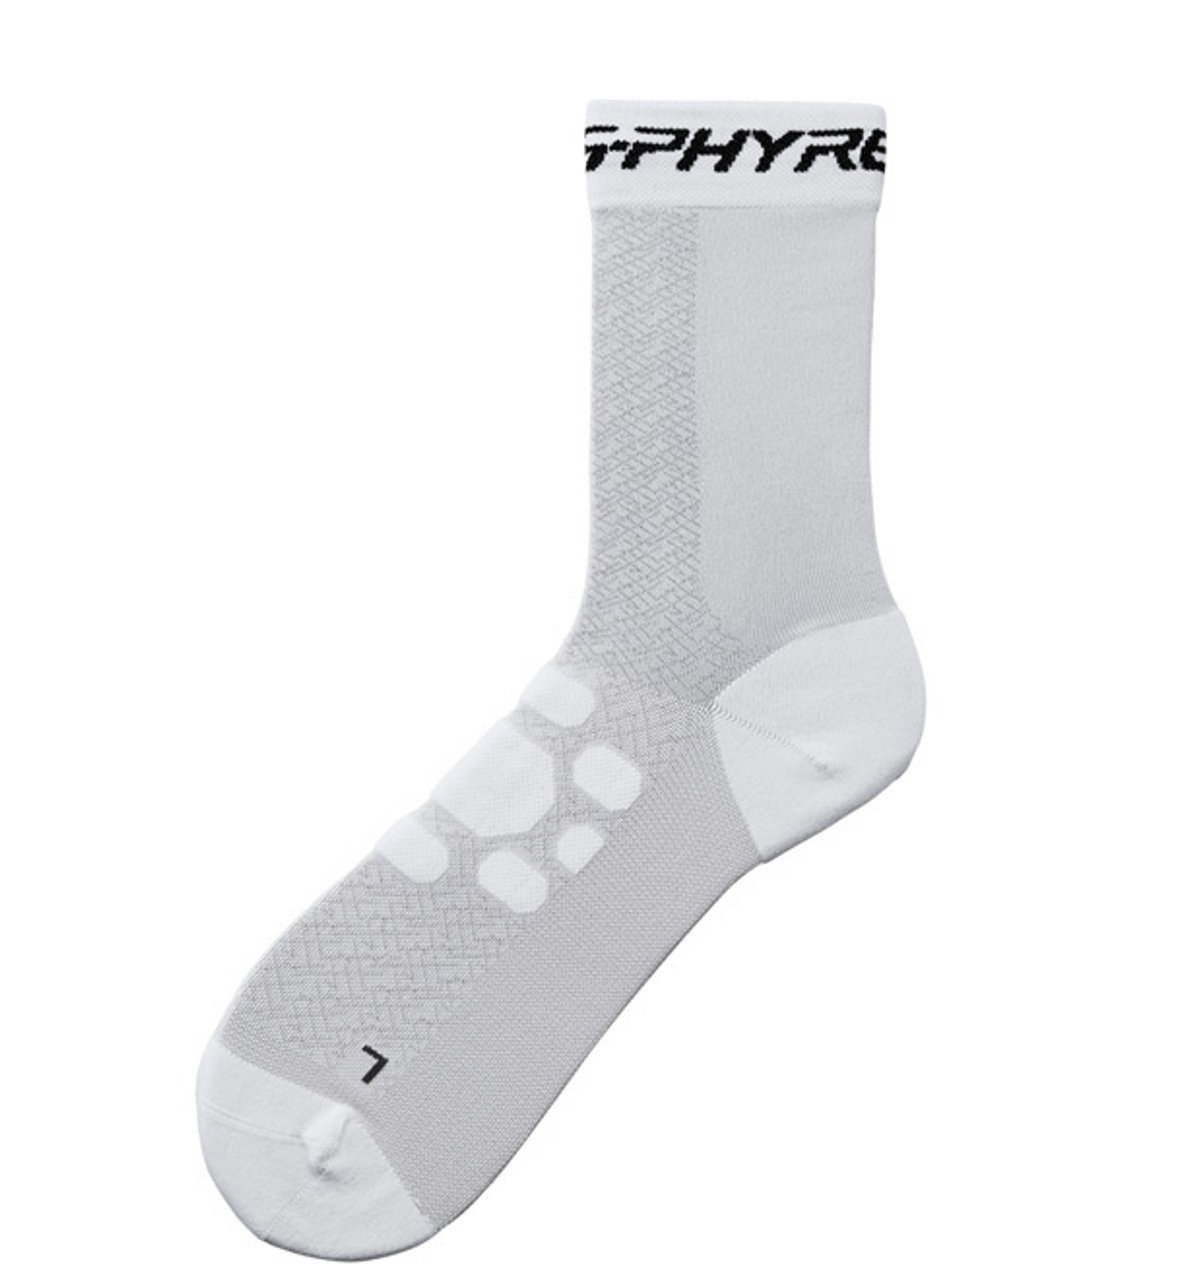 Shimano S-PHYRE Tall Socks In White All Sizes